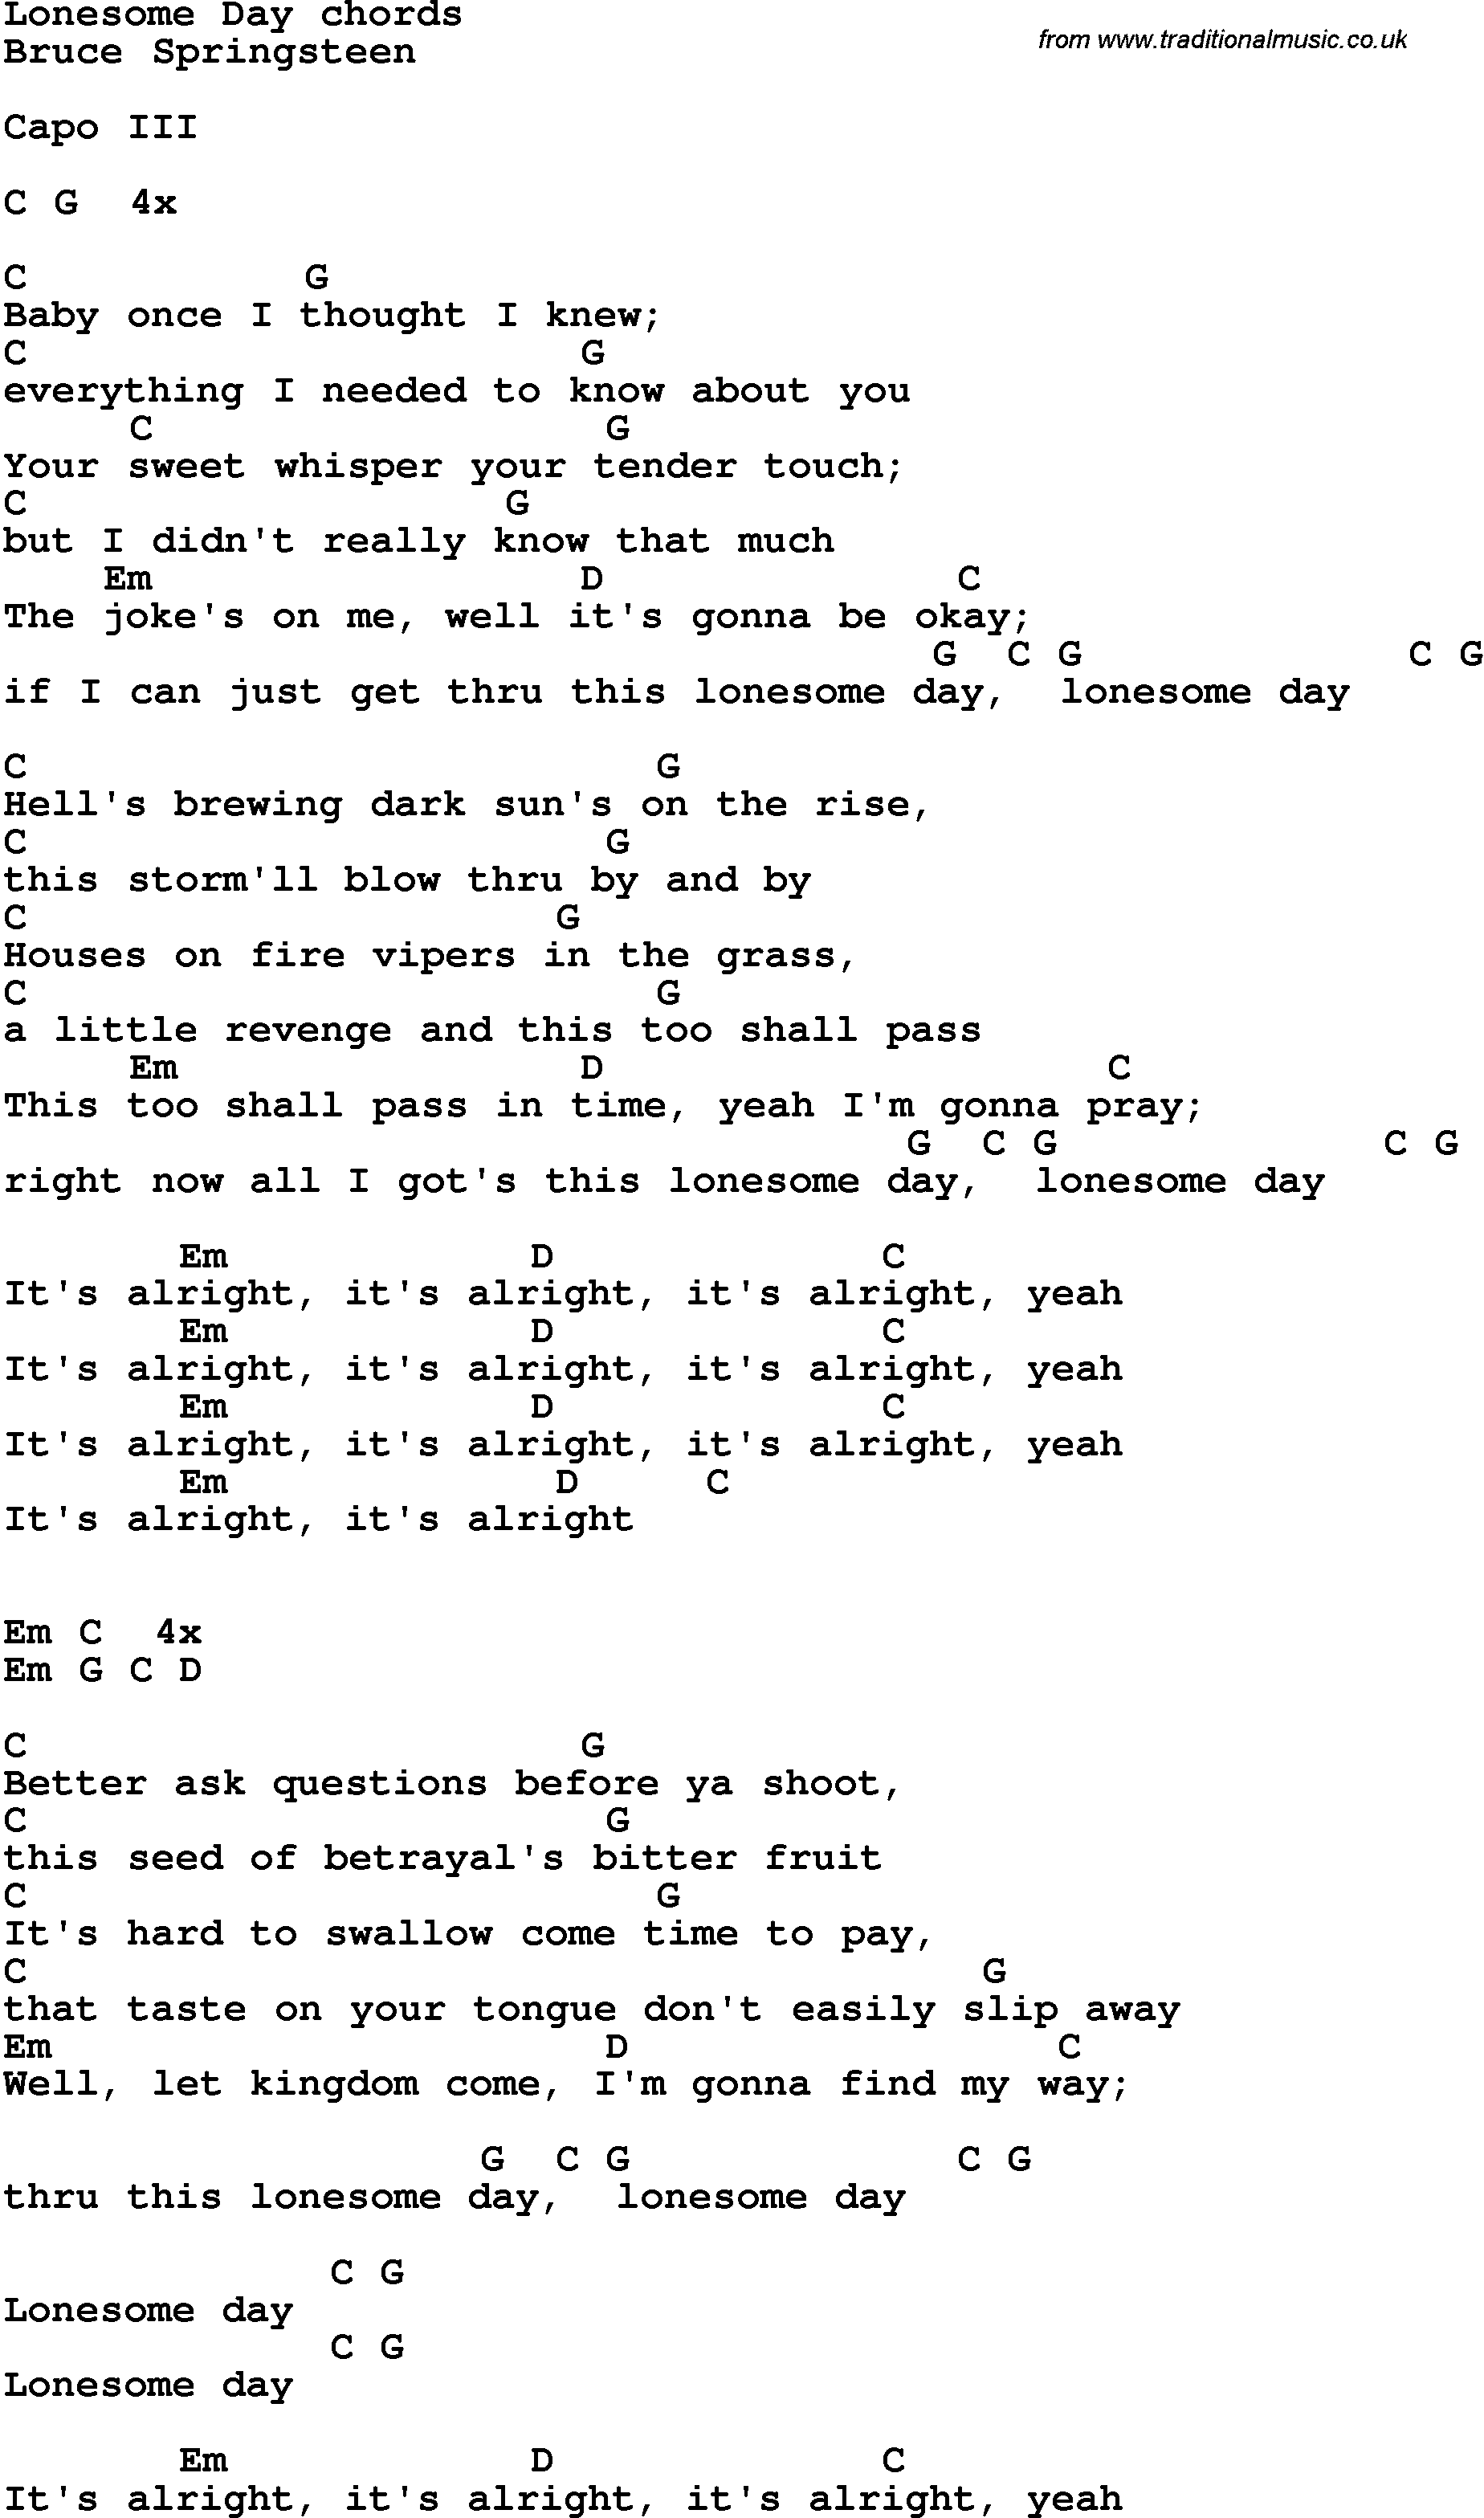 Song Lyrics with guitar chords for Lonesome Day